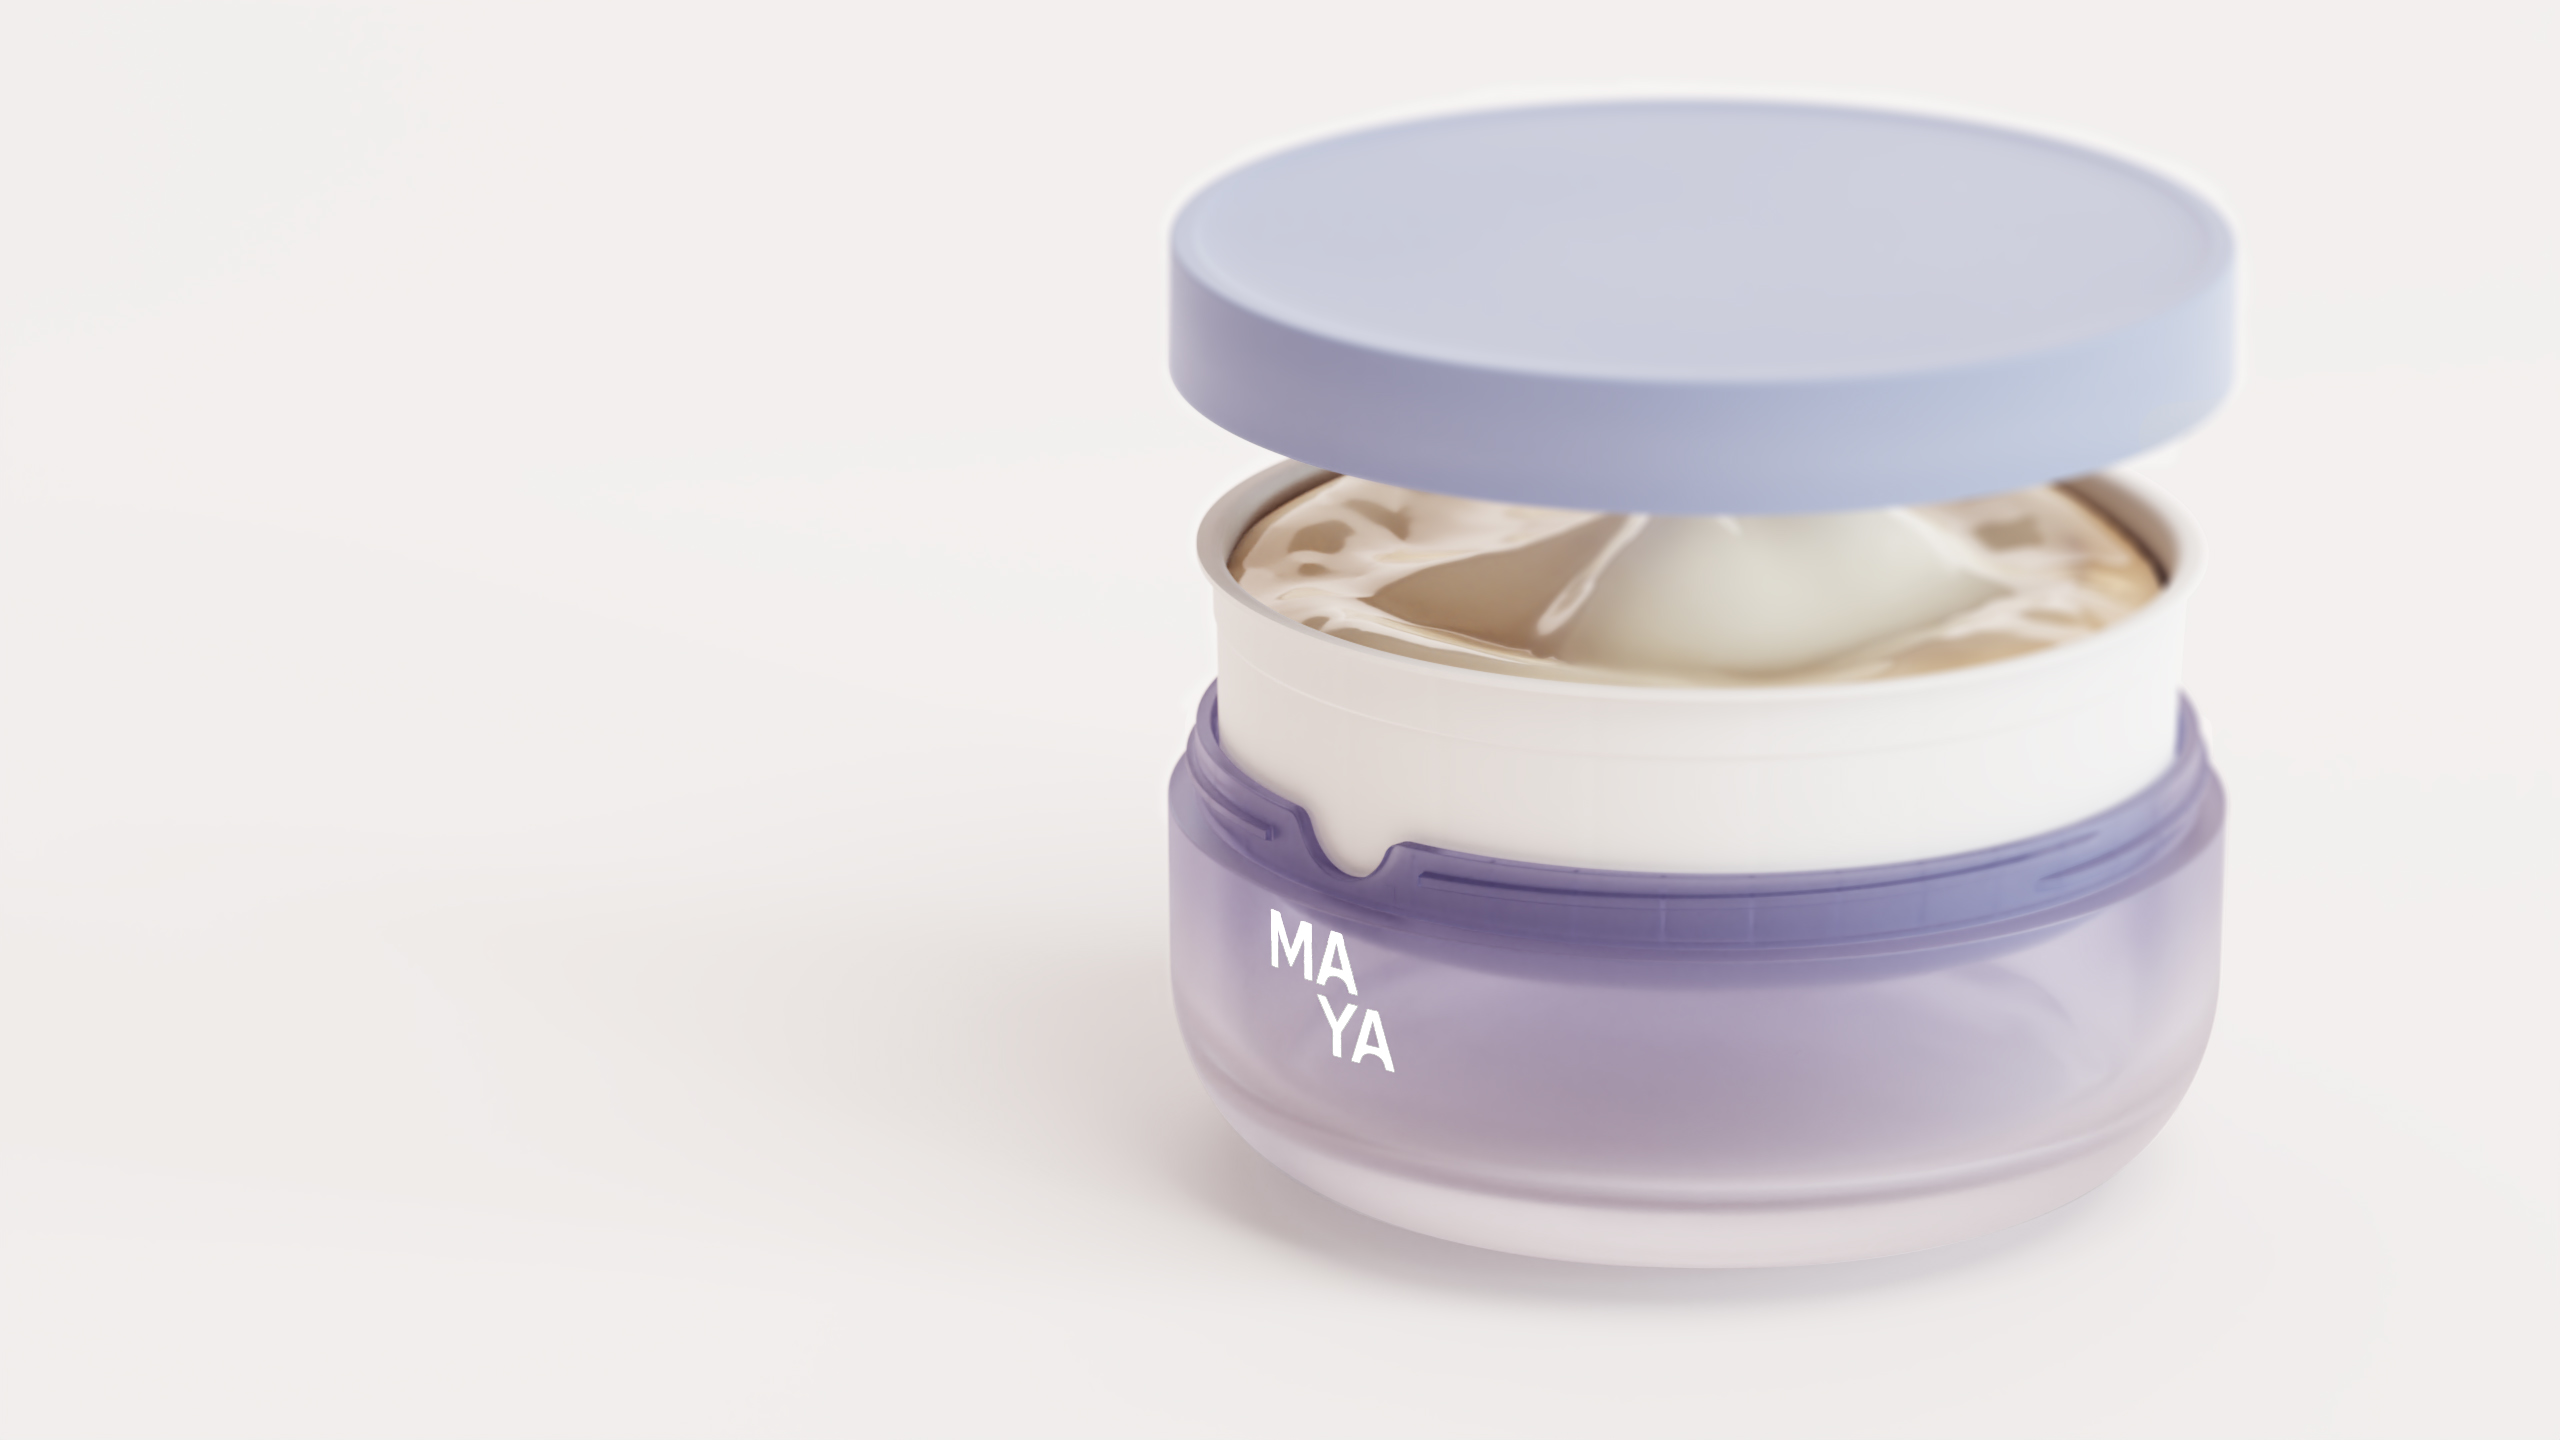 Morrama Launches Maya: A New Range of Refillable Cosmetics Packaging